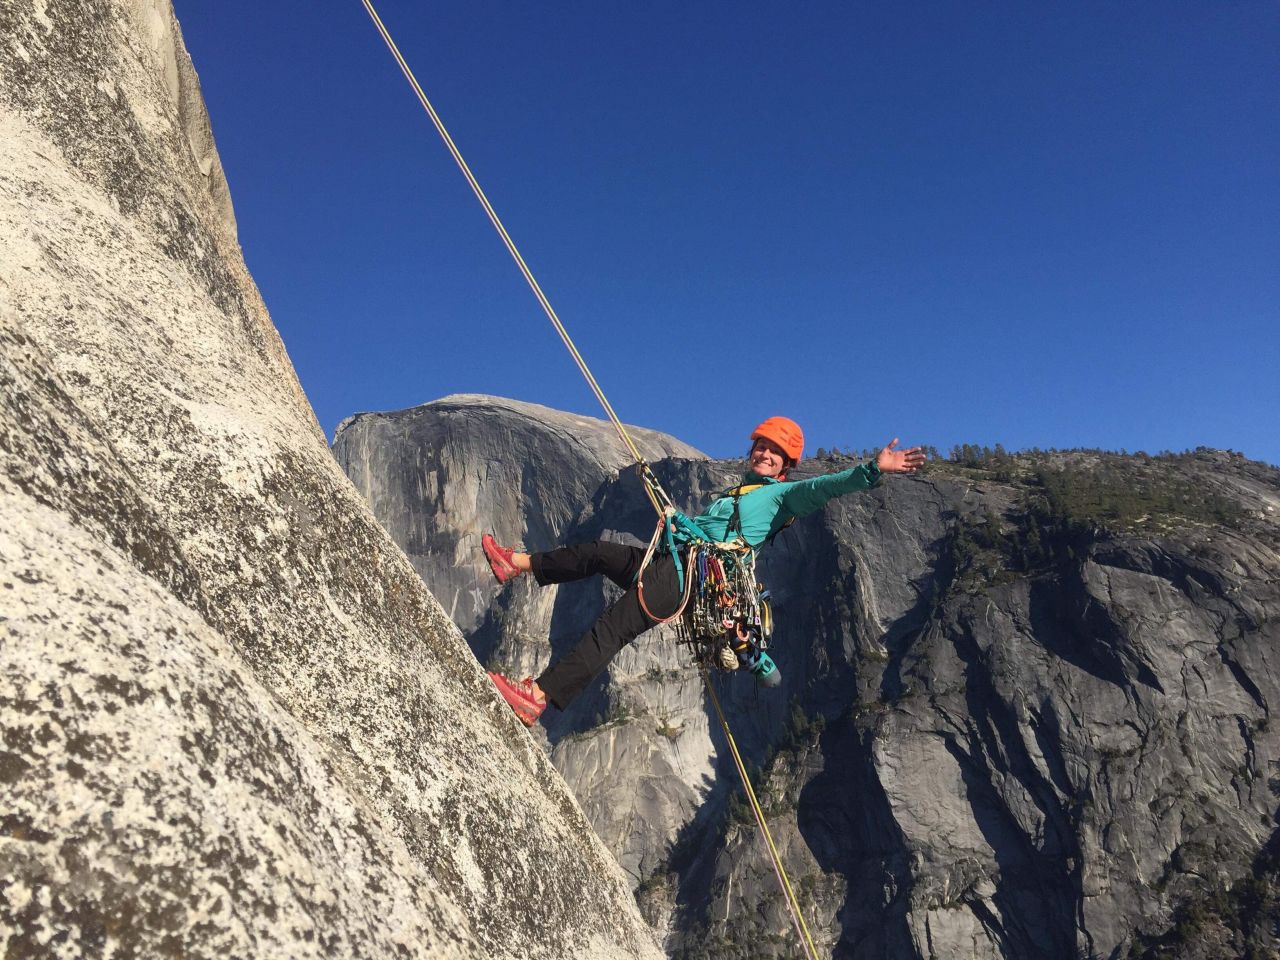 Davidsson in Yosemite National Park, California, with Half Dome in the background. In 2018 she climbed sections of El Capitan.